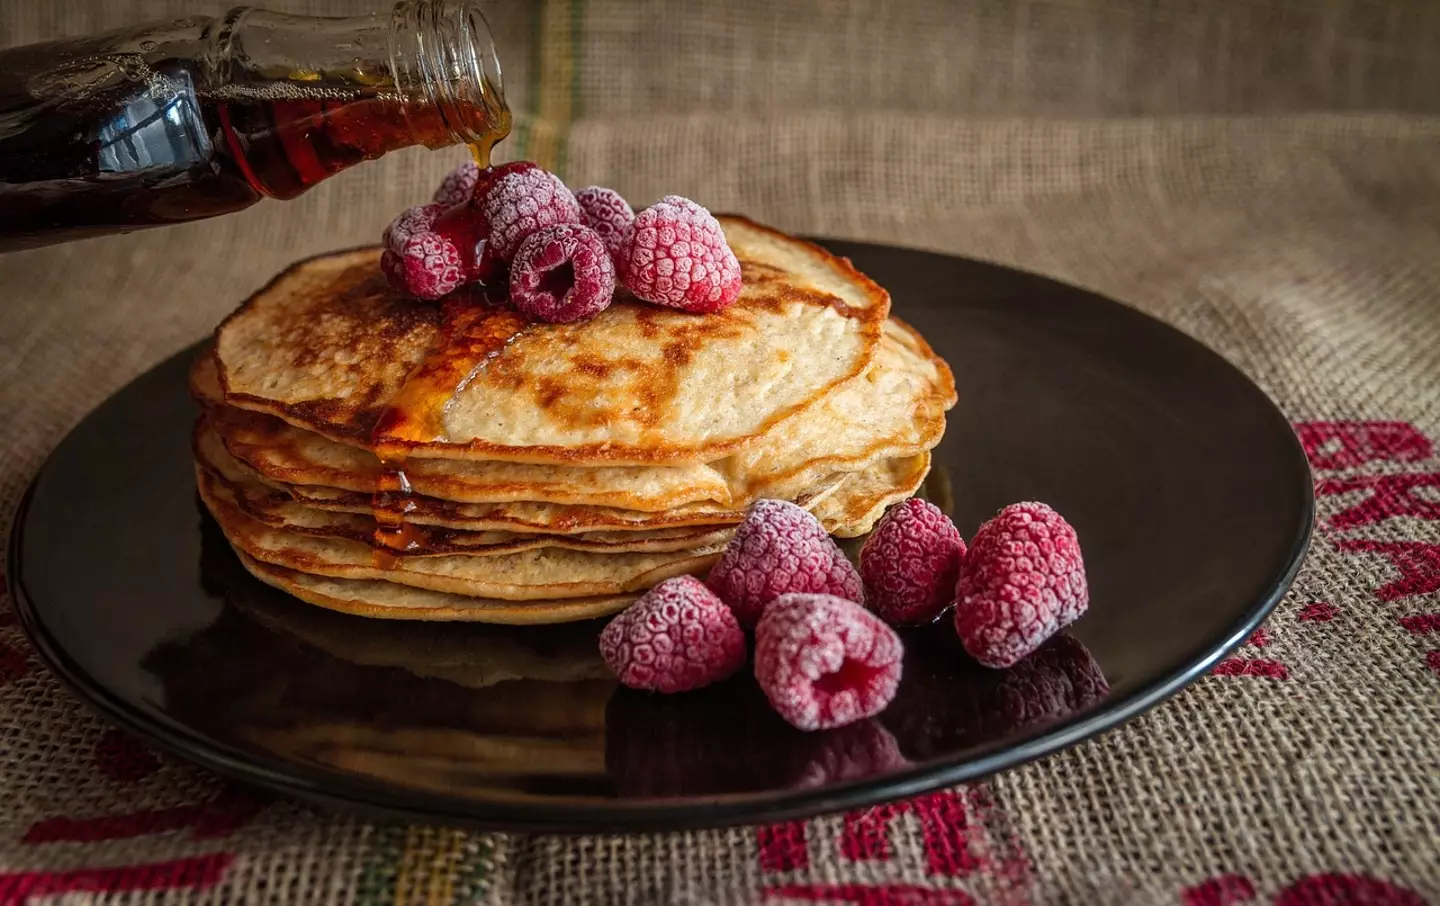 Pancake Tuesday is the best day for a carb-binge, just not for your pipes.